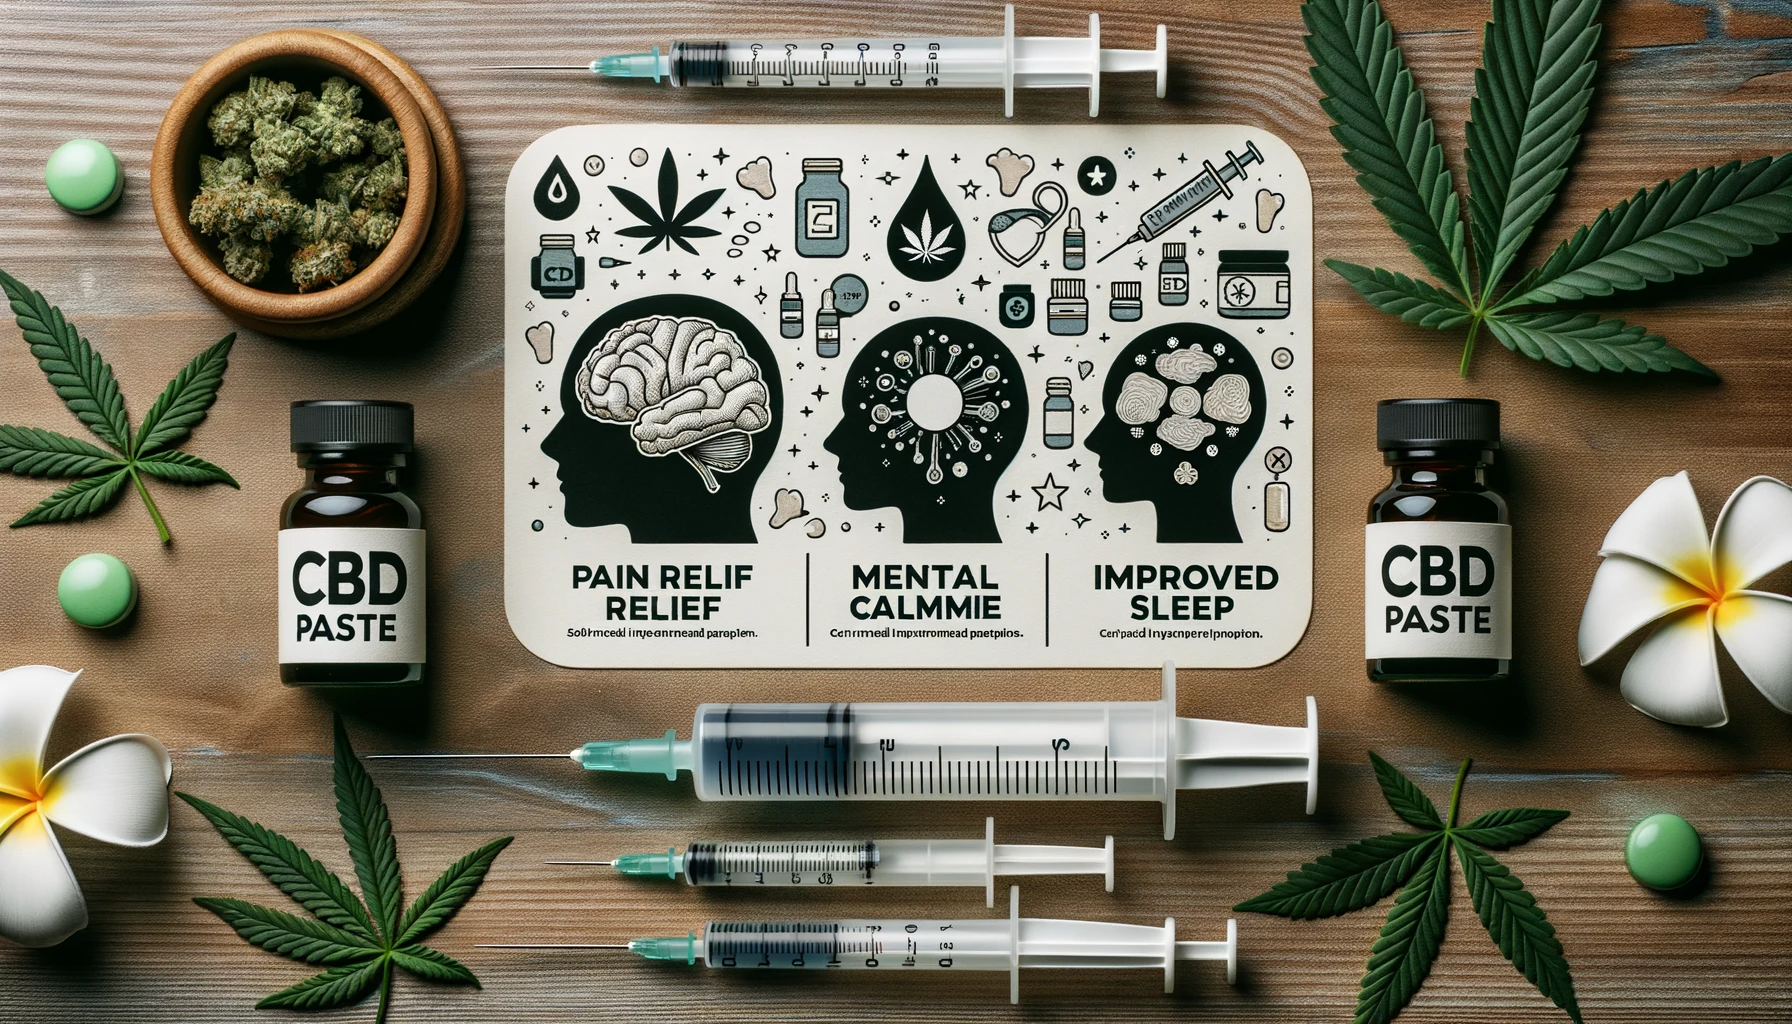 Photograph of a table setup with a variety of CBD paste syringes, alongside illustrated icons representing pain relief and mental calmness